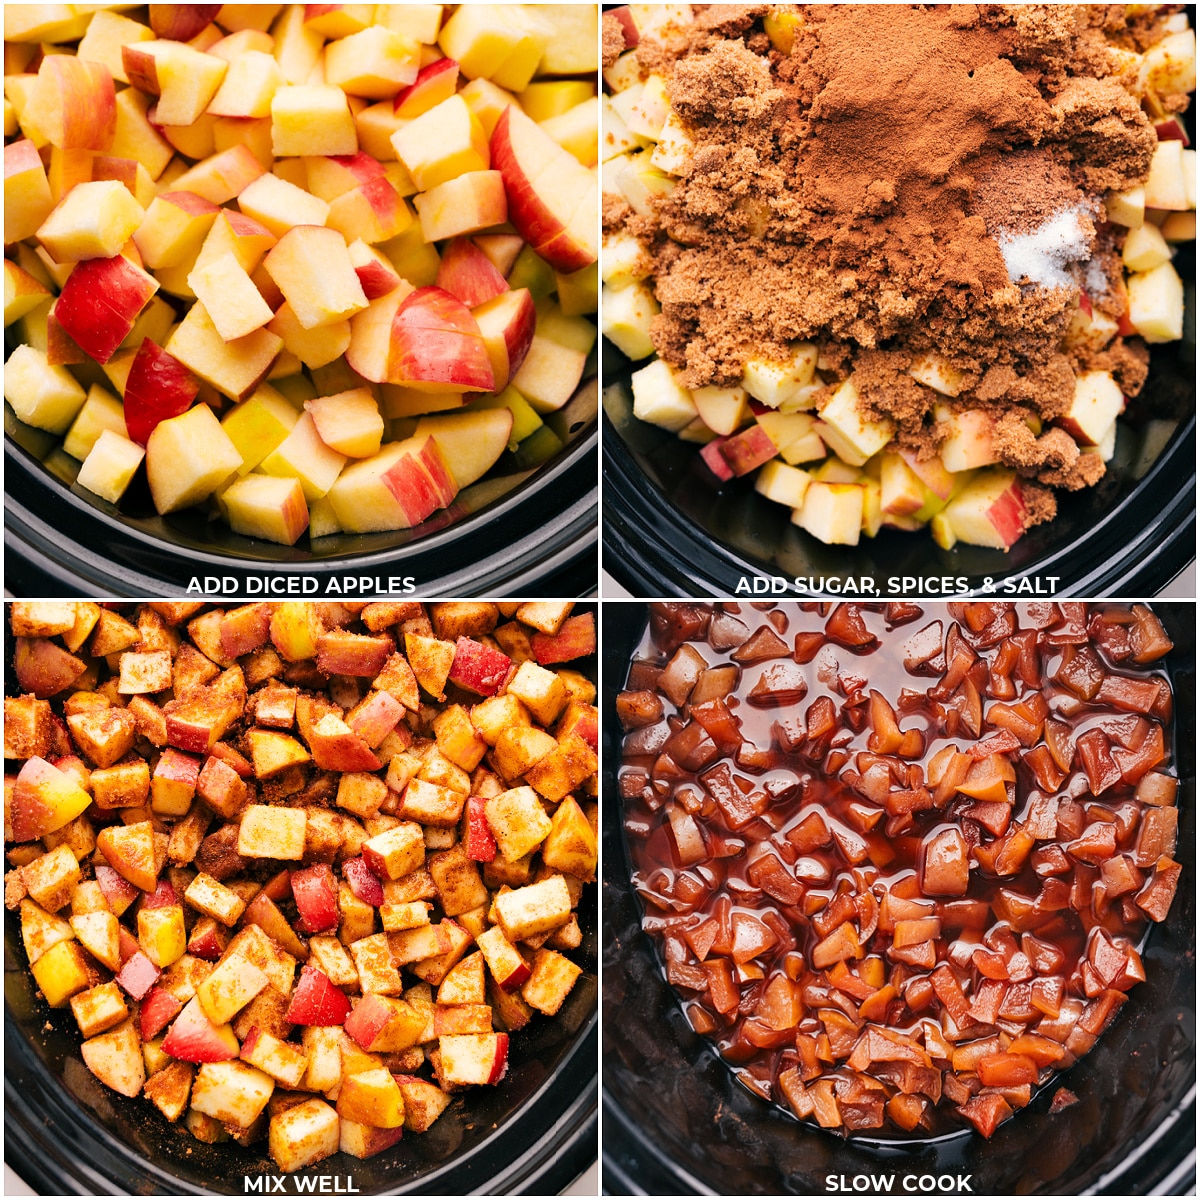 Ingredients for Apple Butter, including fresh apples, spices, vanilla, and sugar, being added to a slow cooker for simmering.